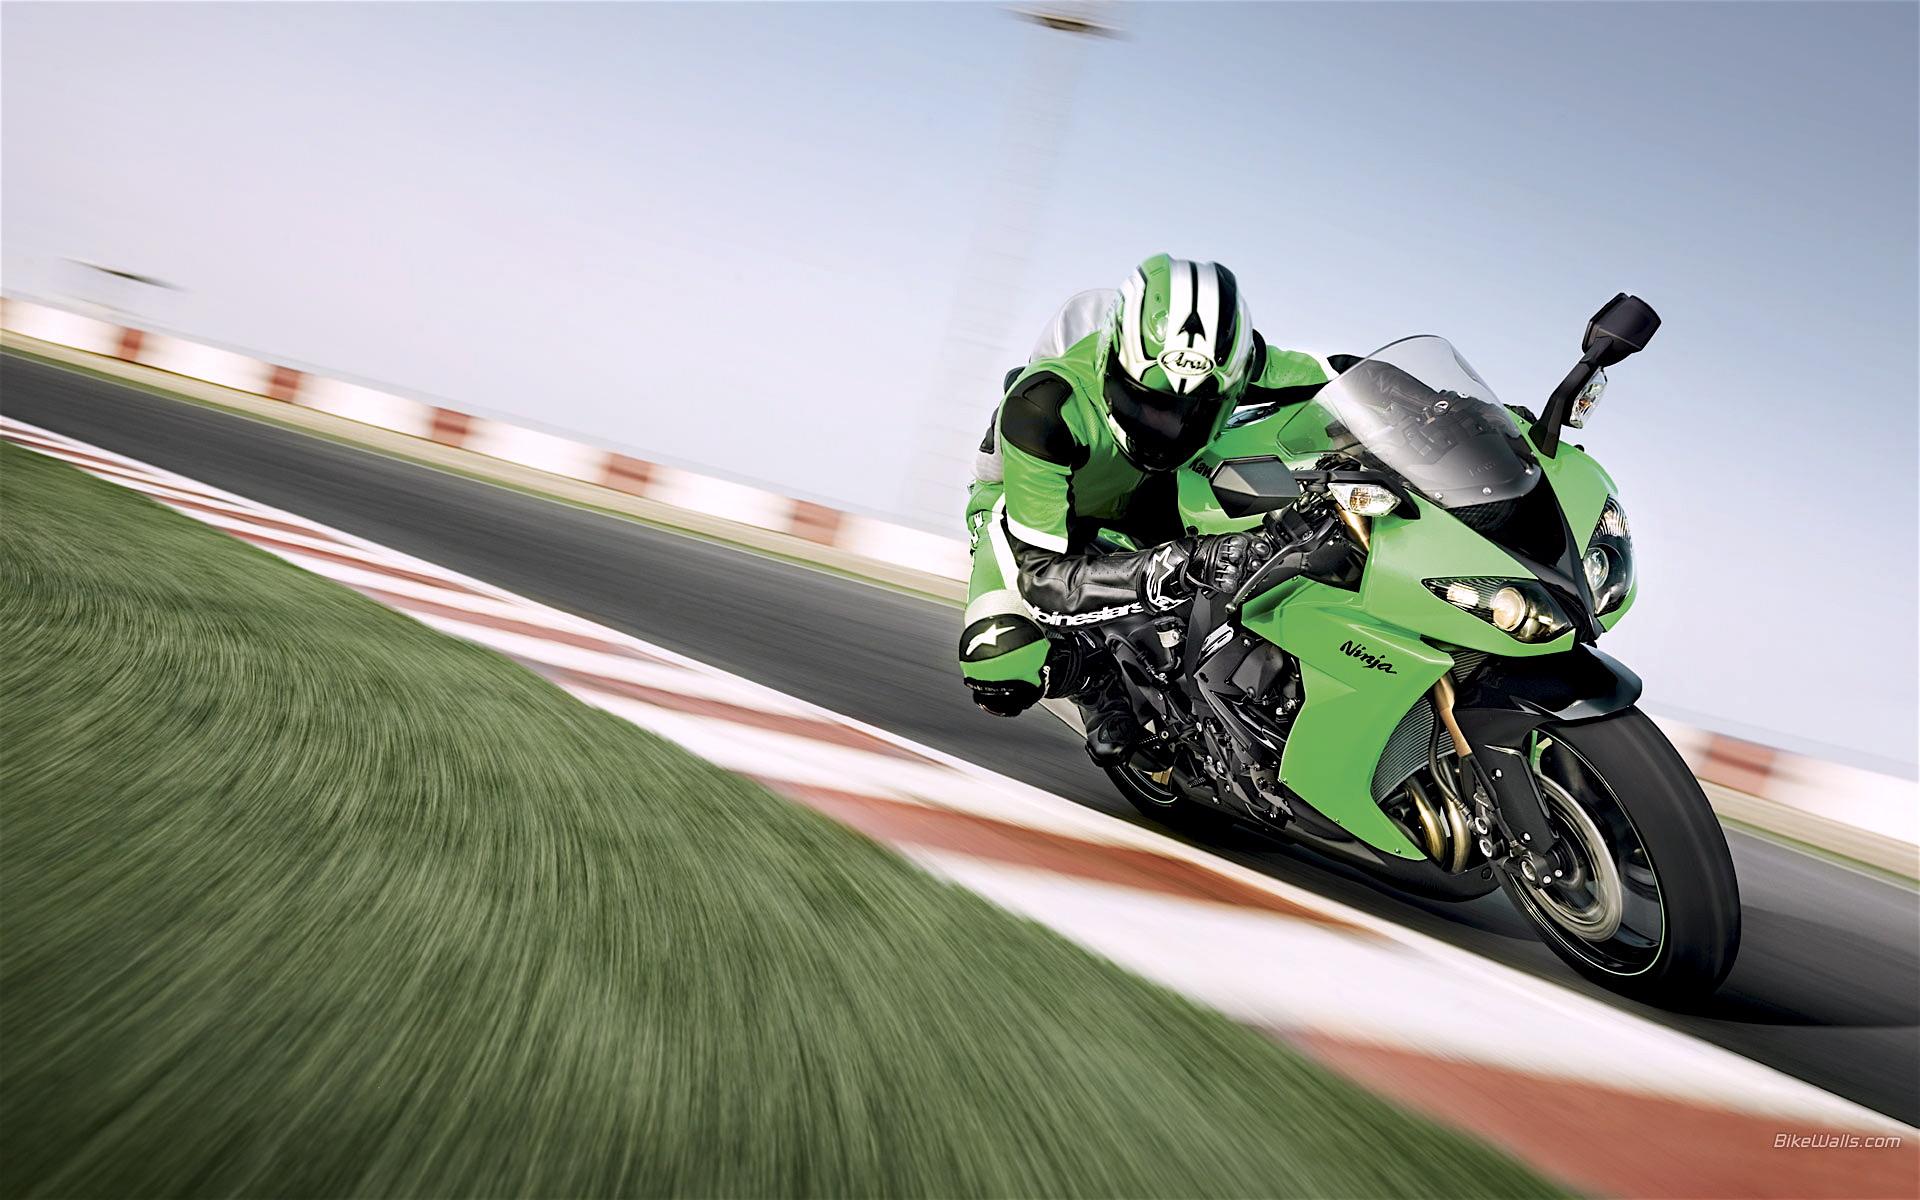 Zx10r 4K wallpaper for your desktop or mobile screen free